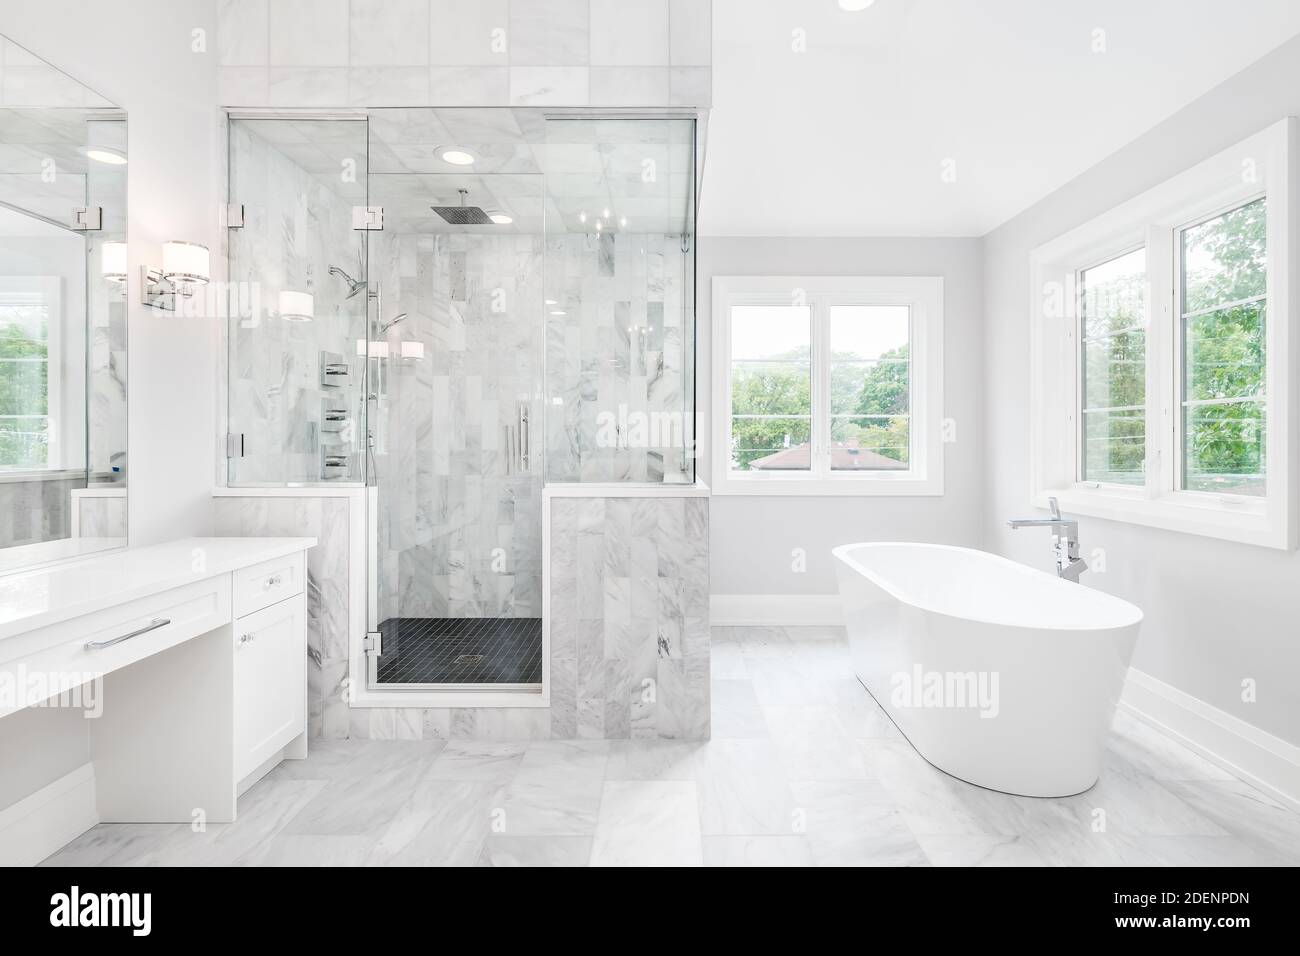 A large luxurious bathroom with a stand alone tub, white vanity, and a glass stand up shower with marble tiles and bench seat. Stock Photo